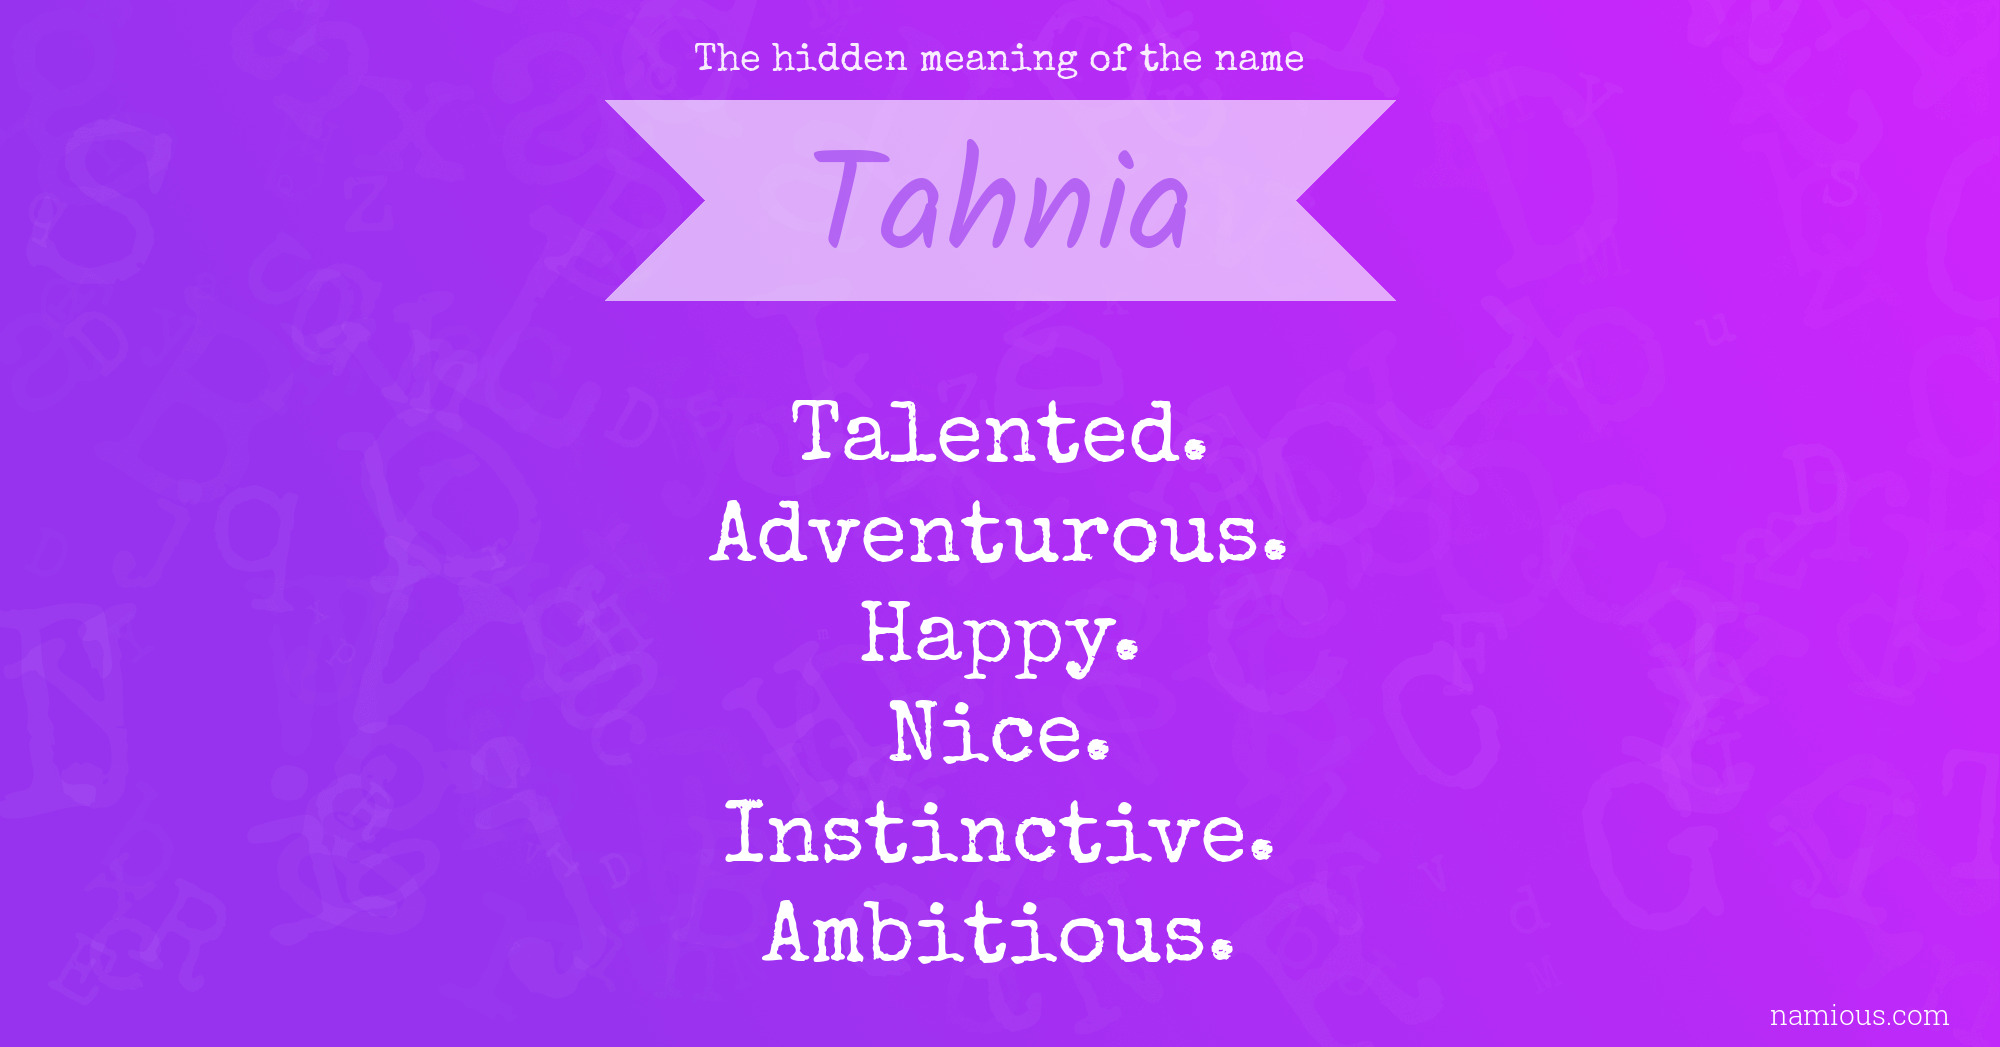 The hidden meaning of the name Tahnia